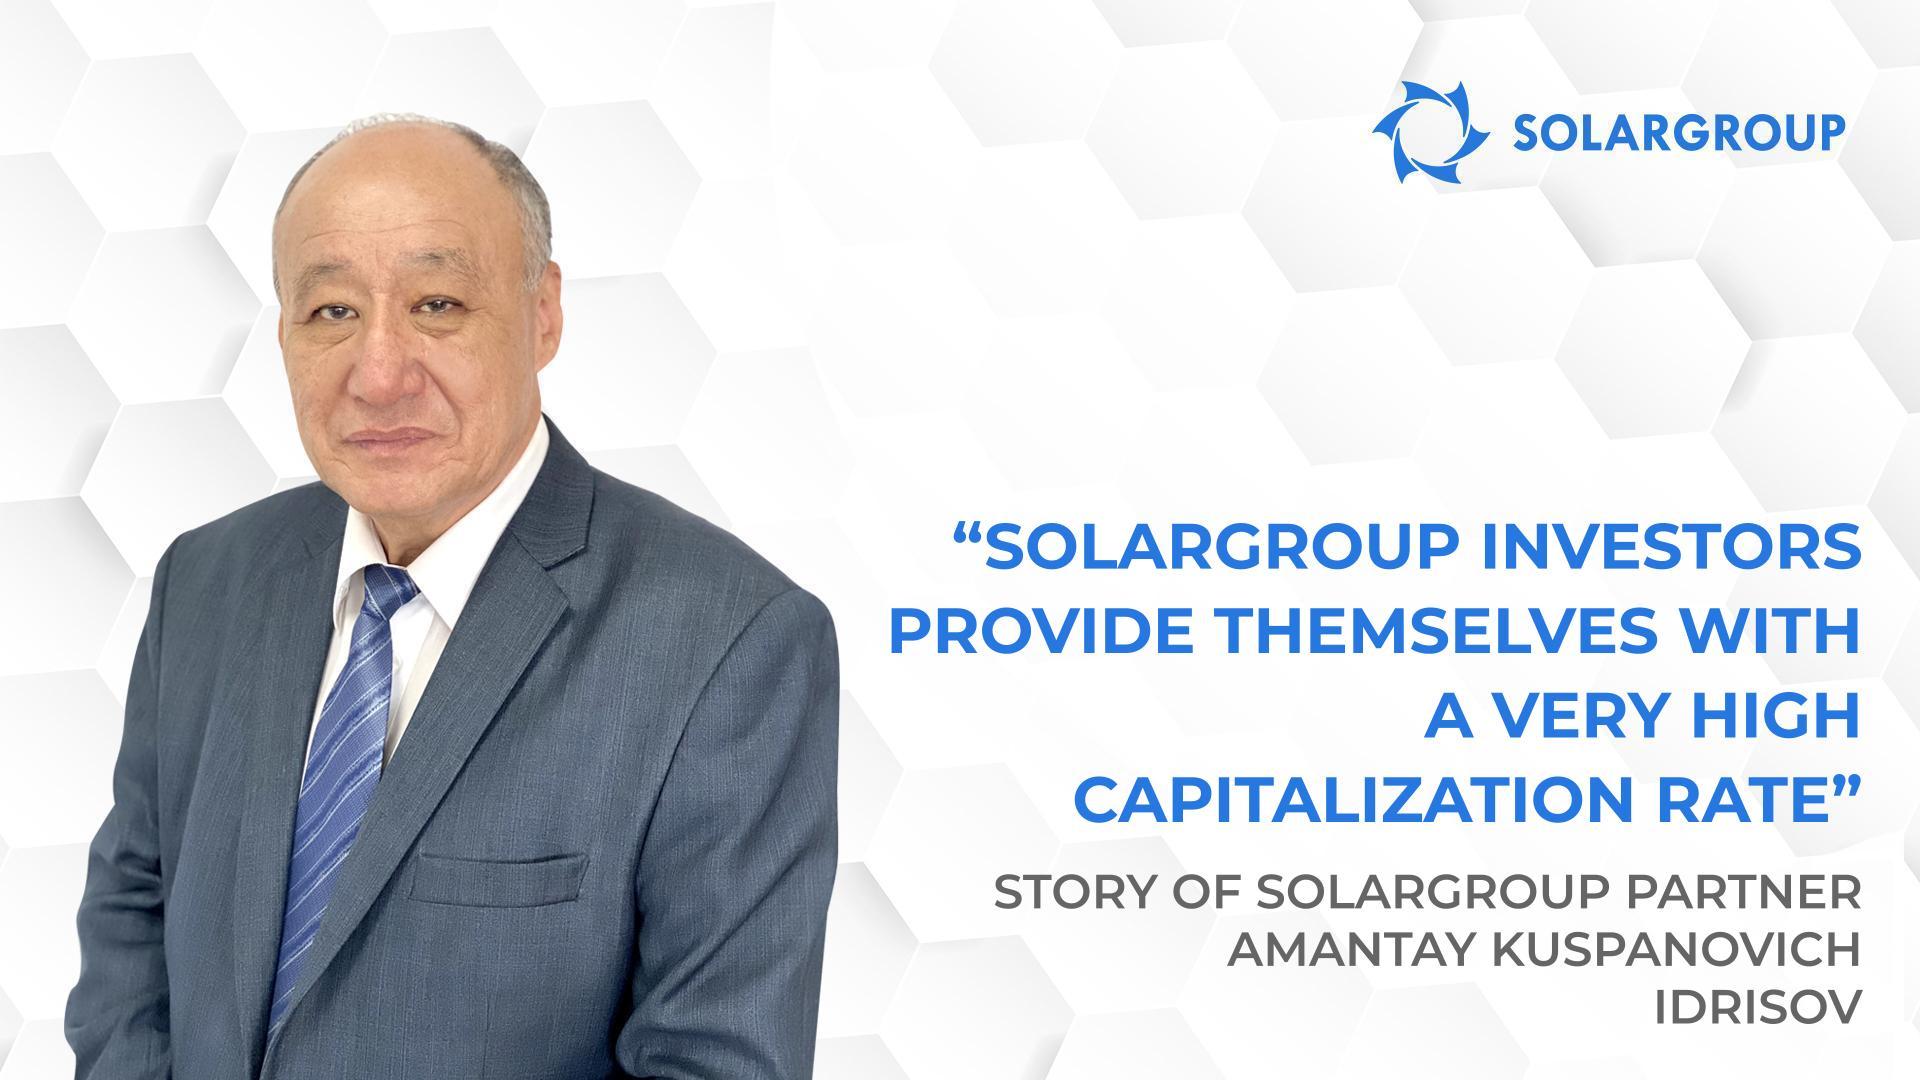 When inviting people, I always share my personal experience | Story of SOLARGROUP partner Amantay Kuspanovich Idrisov